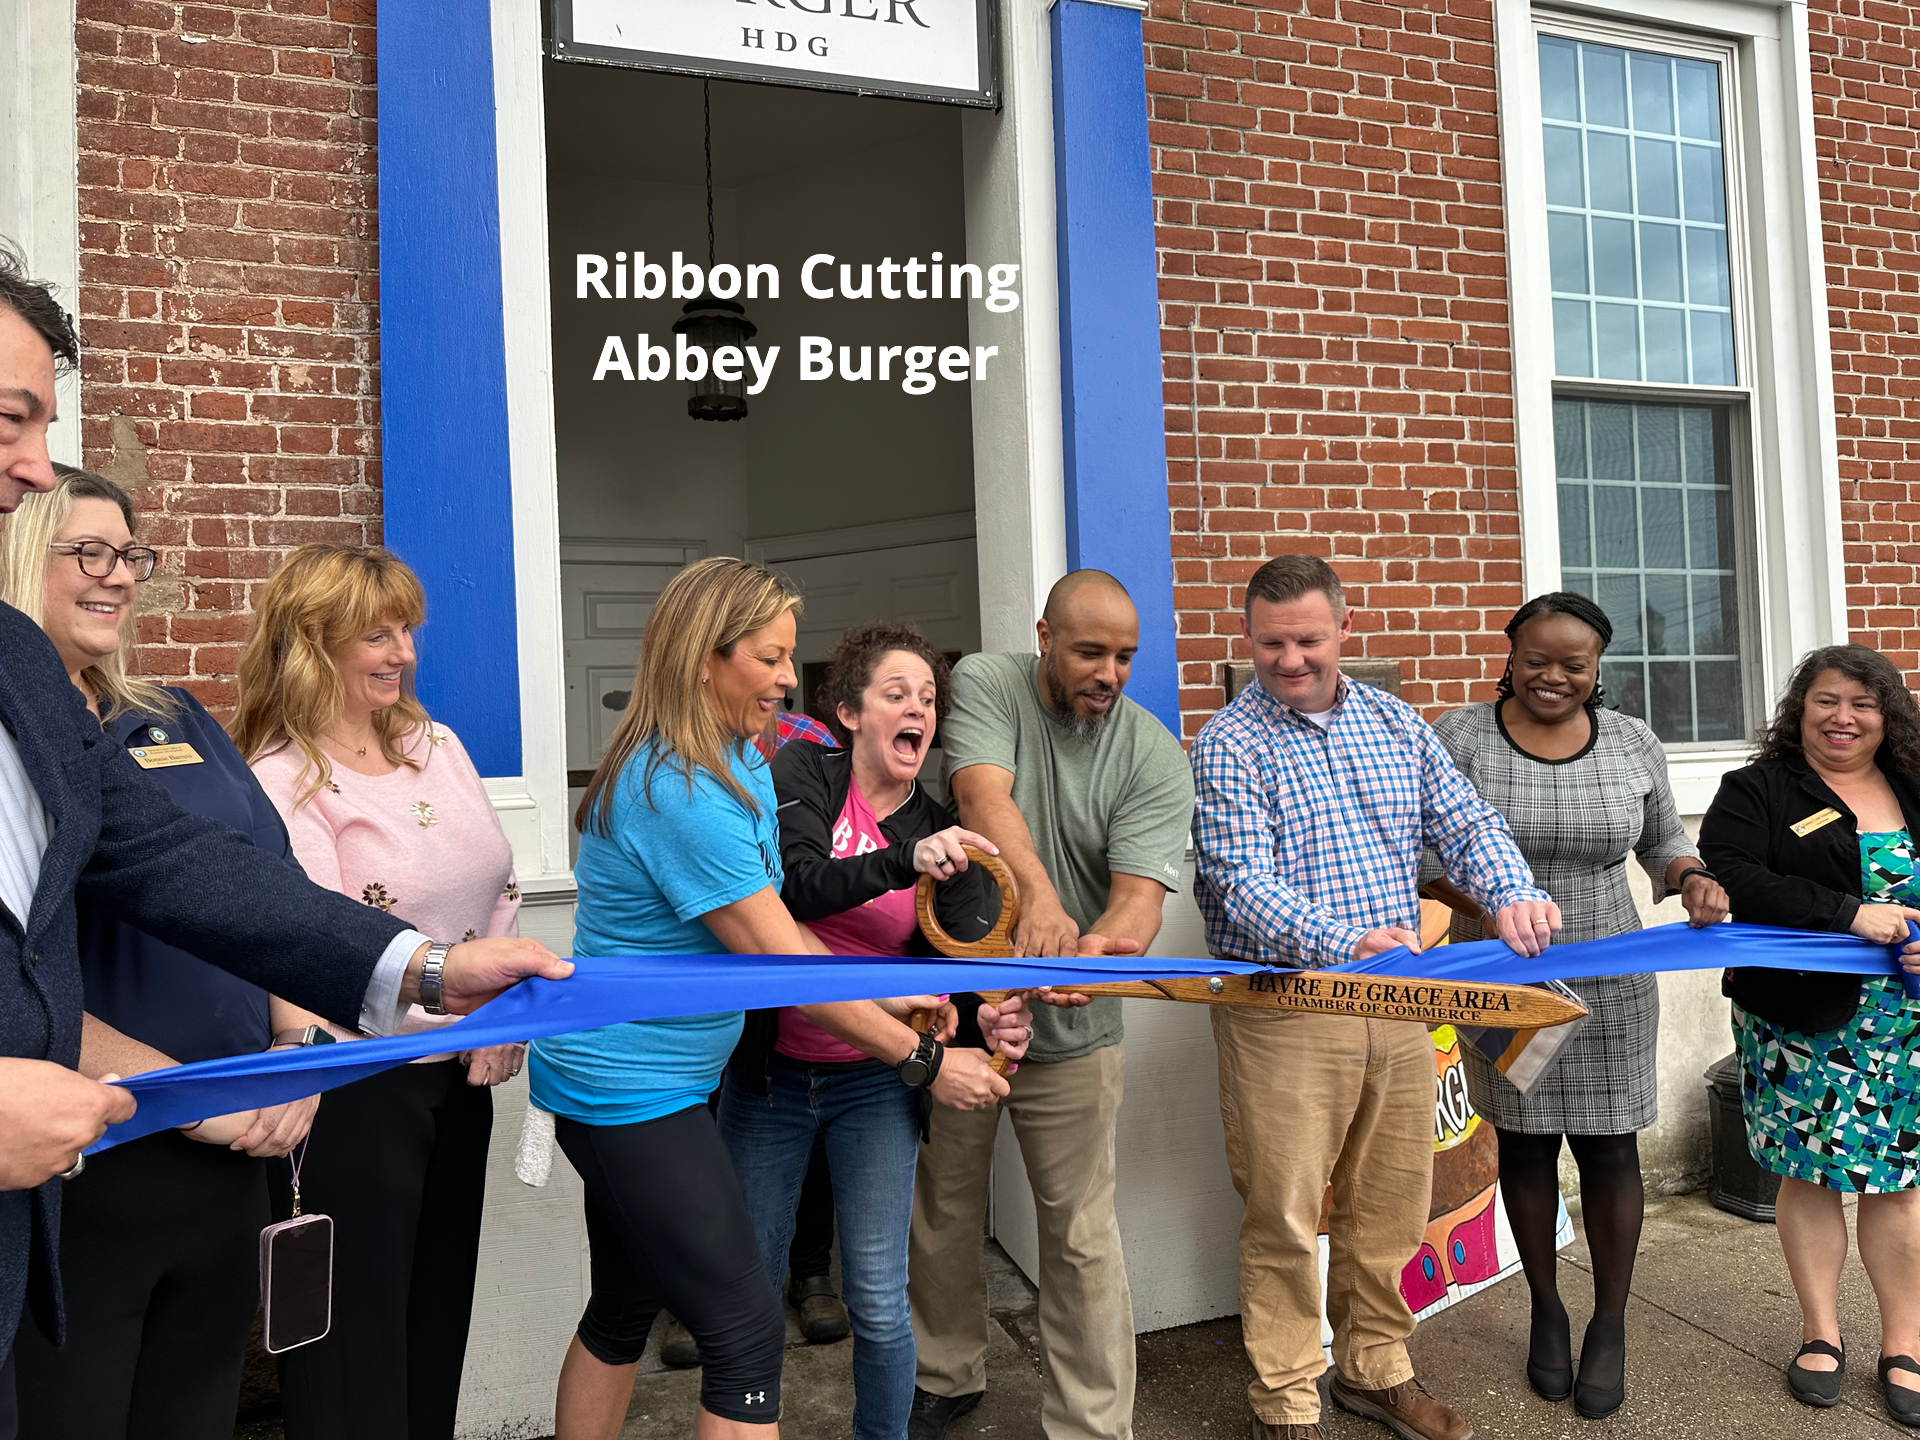 A ribbon cutting ceremony on the downtown.